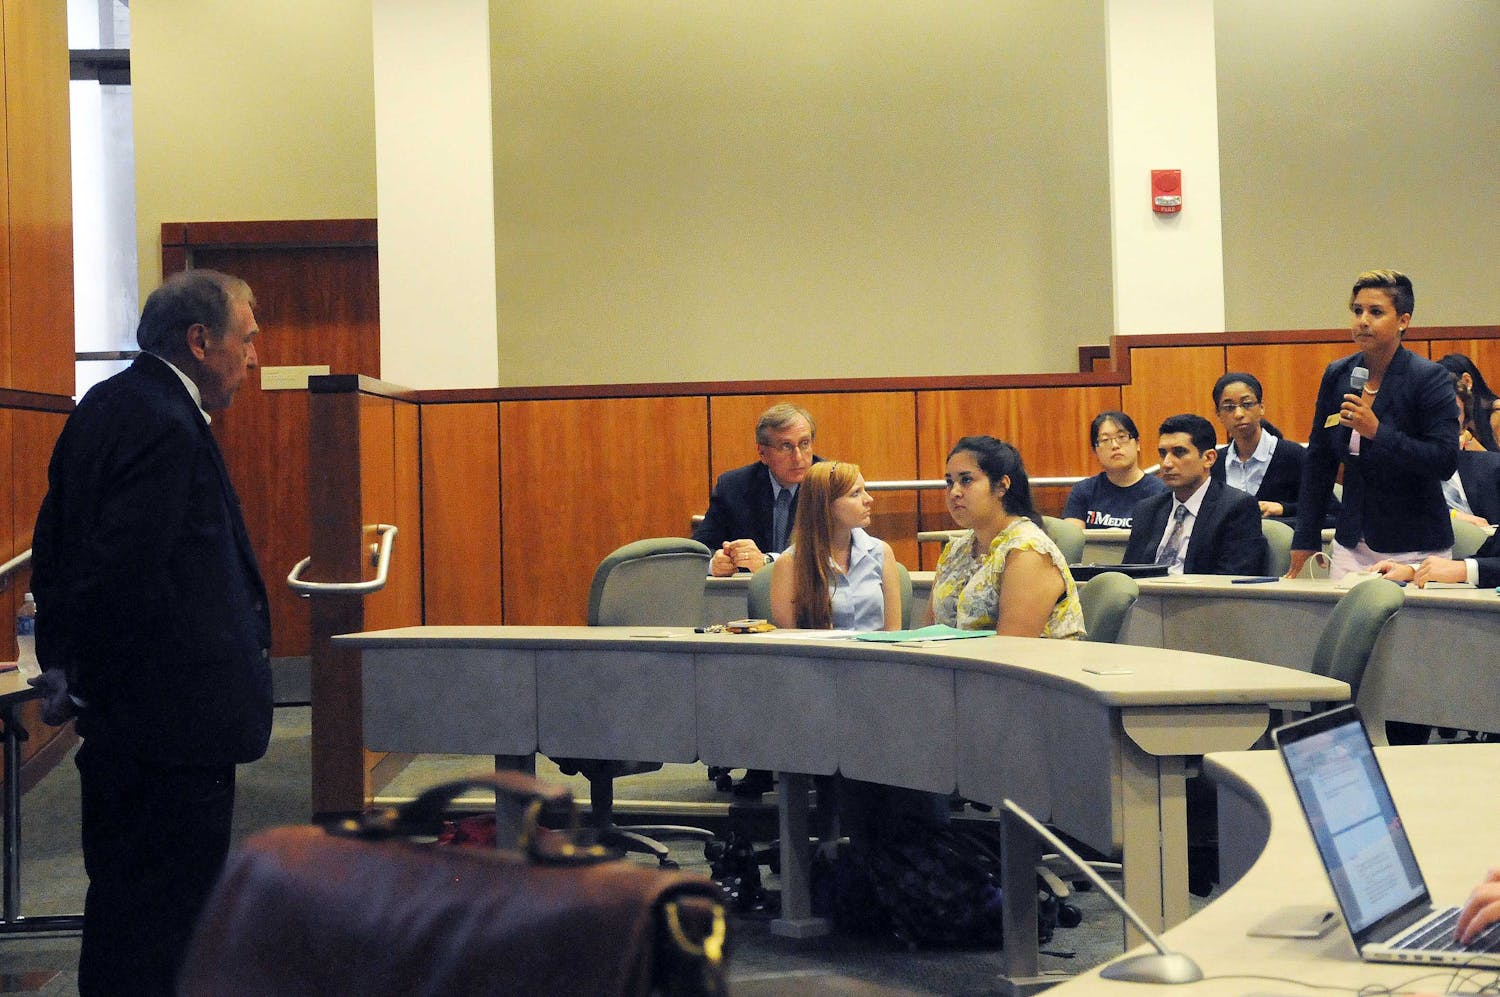 UF student Denae Campanale (right) addresses her concerns about diversity to Winfred Phillips, chairman of President Kent Fuchs' goal-setting task force, at the student town hall meeting on July 7, 2015, at the UF Levin College of Law.